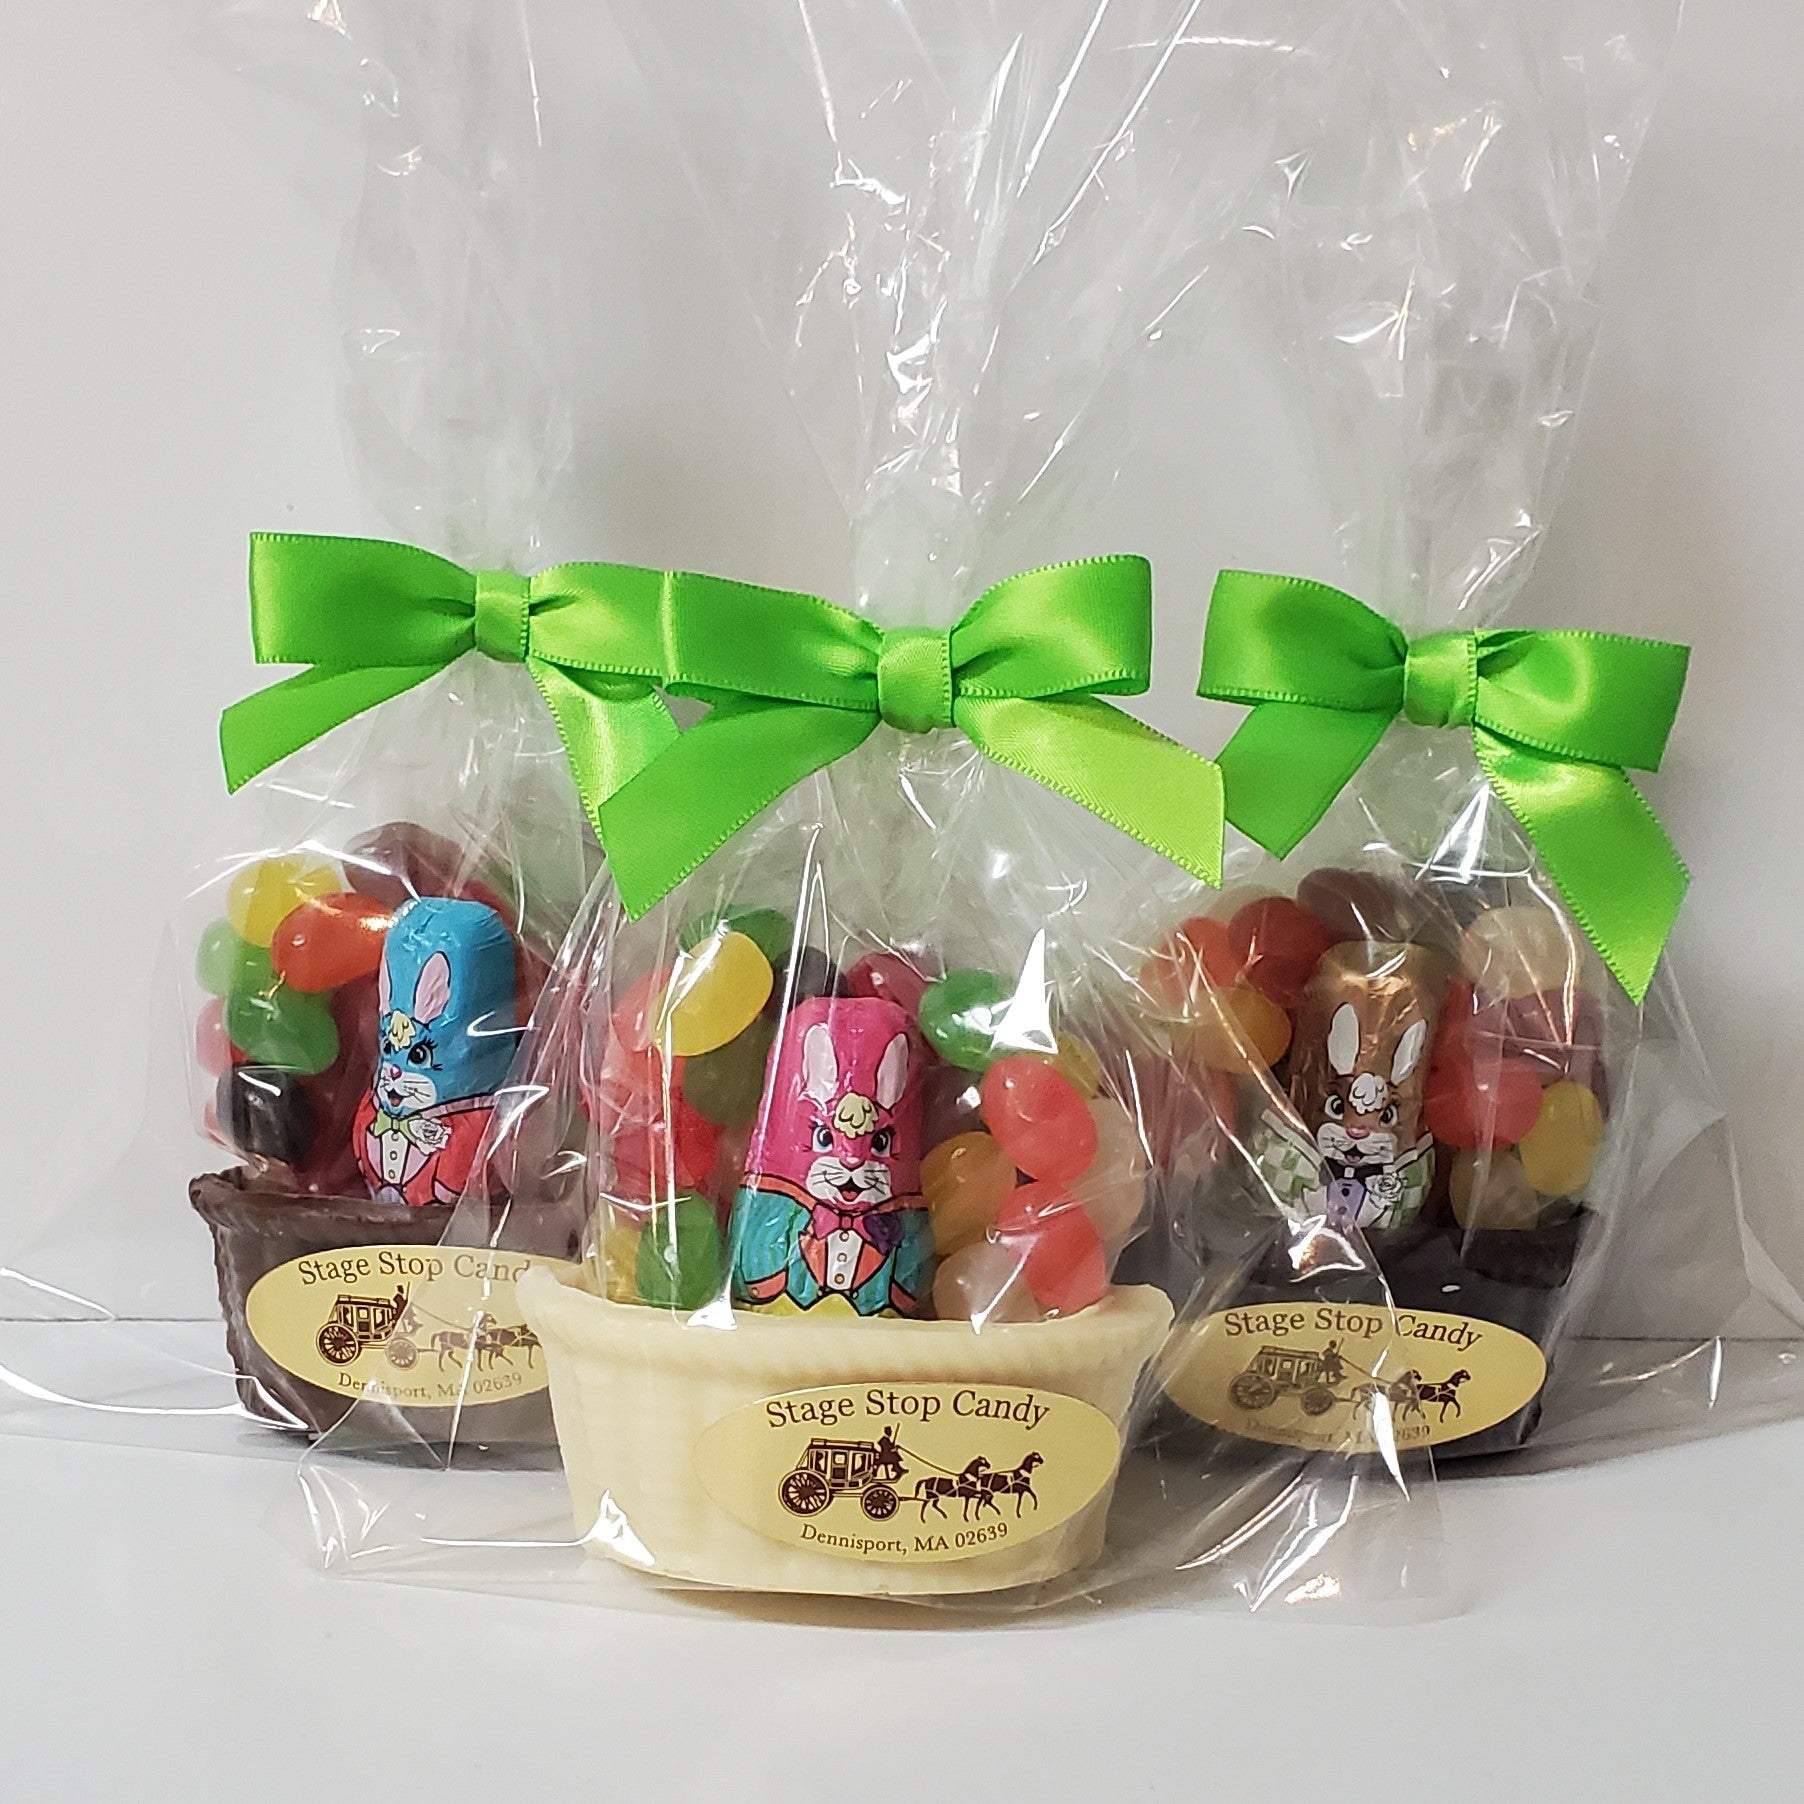 Milk, White and Dark Chocolate Baskets filled with jelly beans and foiled chocolate bunny